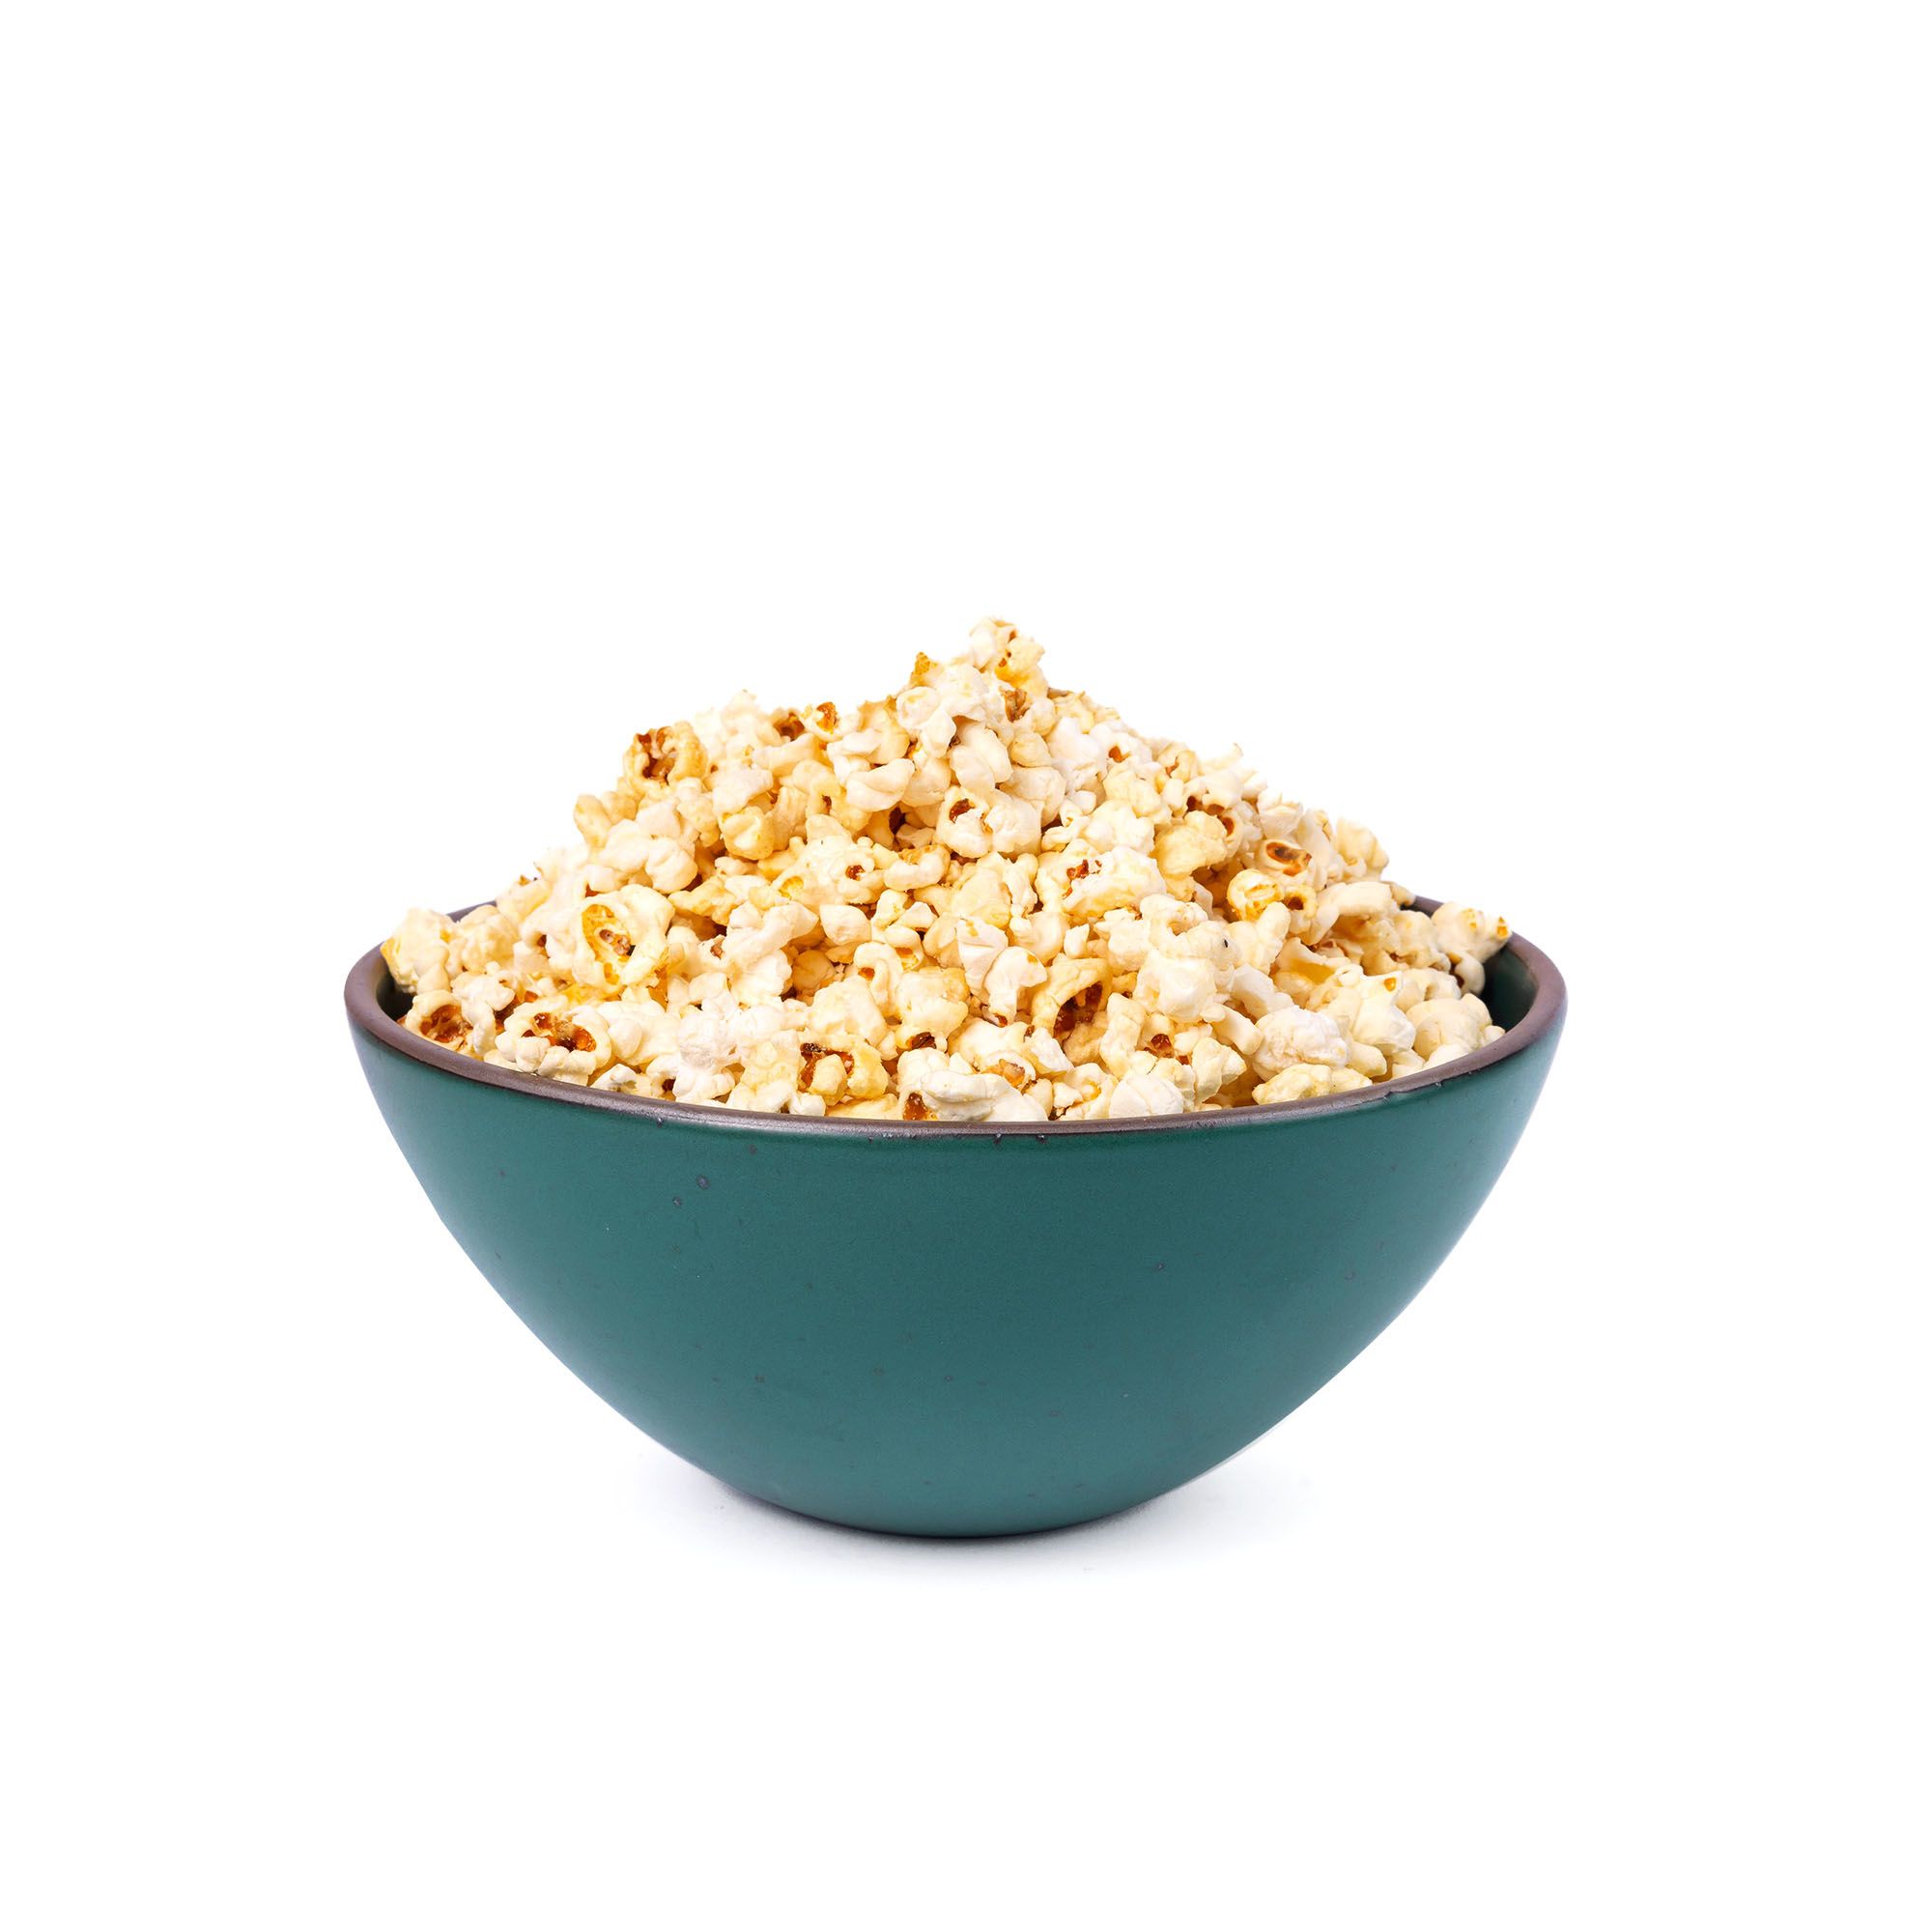 Popcorn in a large rounded ceramic bowl in a deep dark teal color featuring iron speckles and an unglazed rim